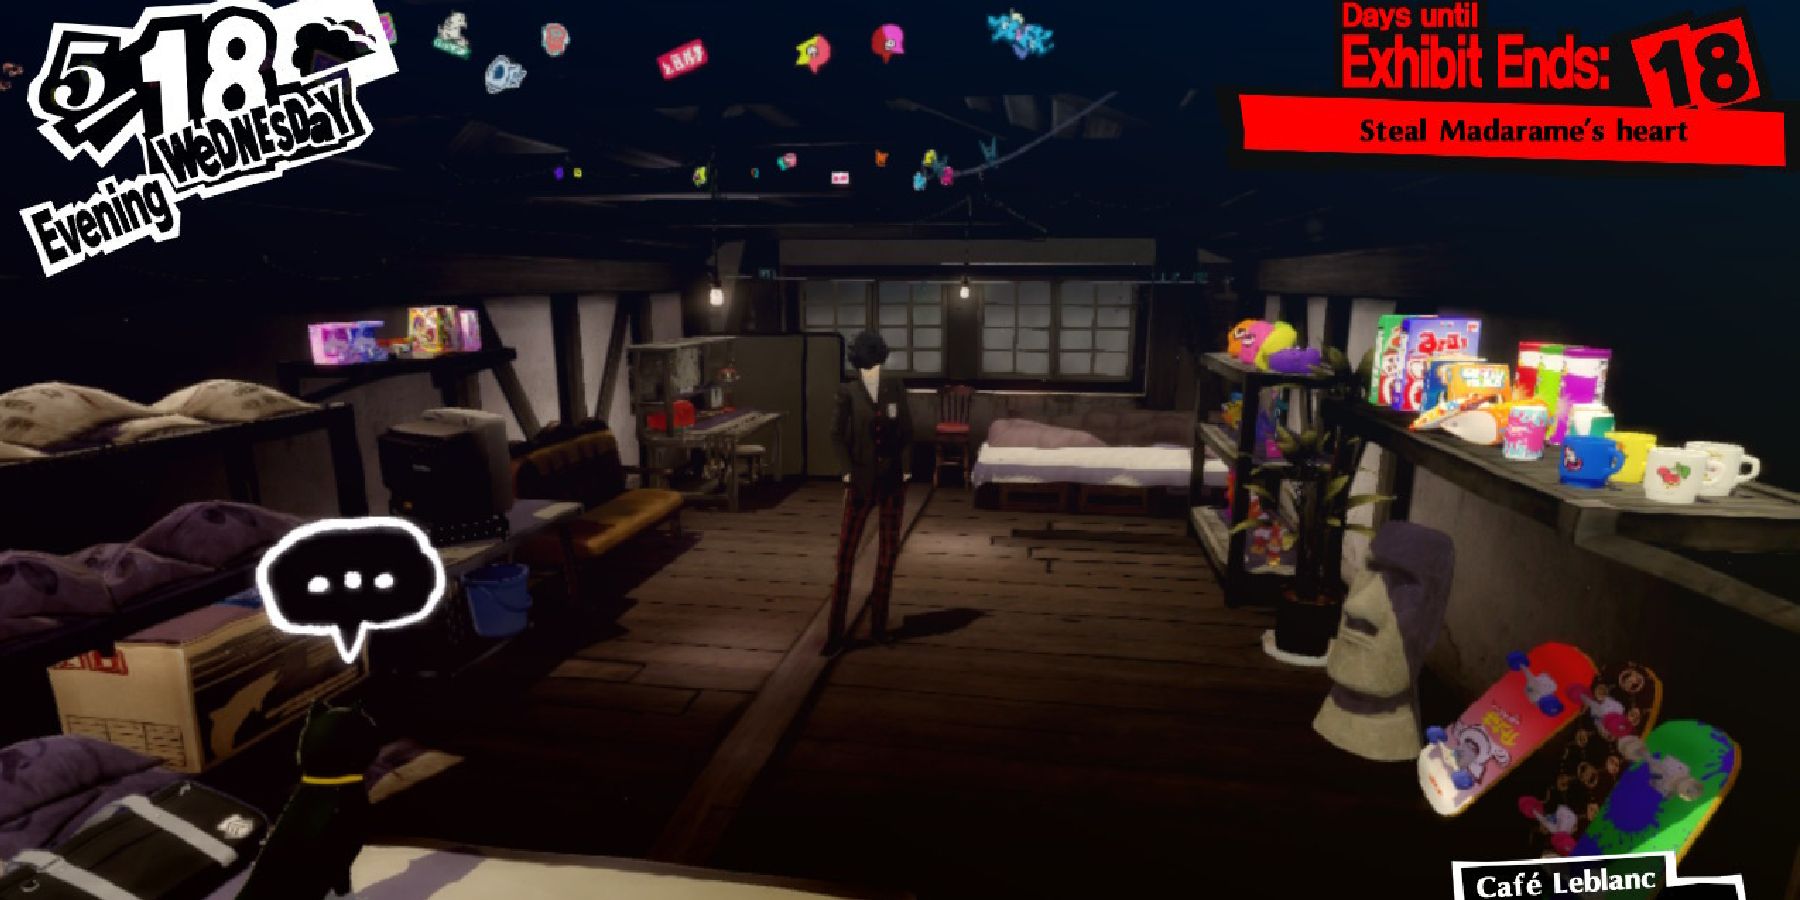 10 Awesome persona 5 bedroom decorations Ideas Inspired by the Game